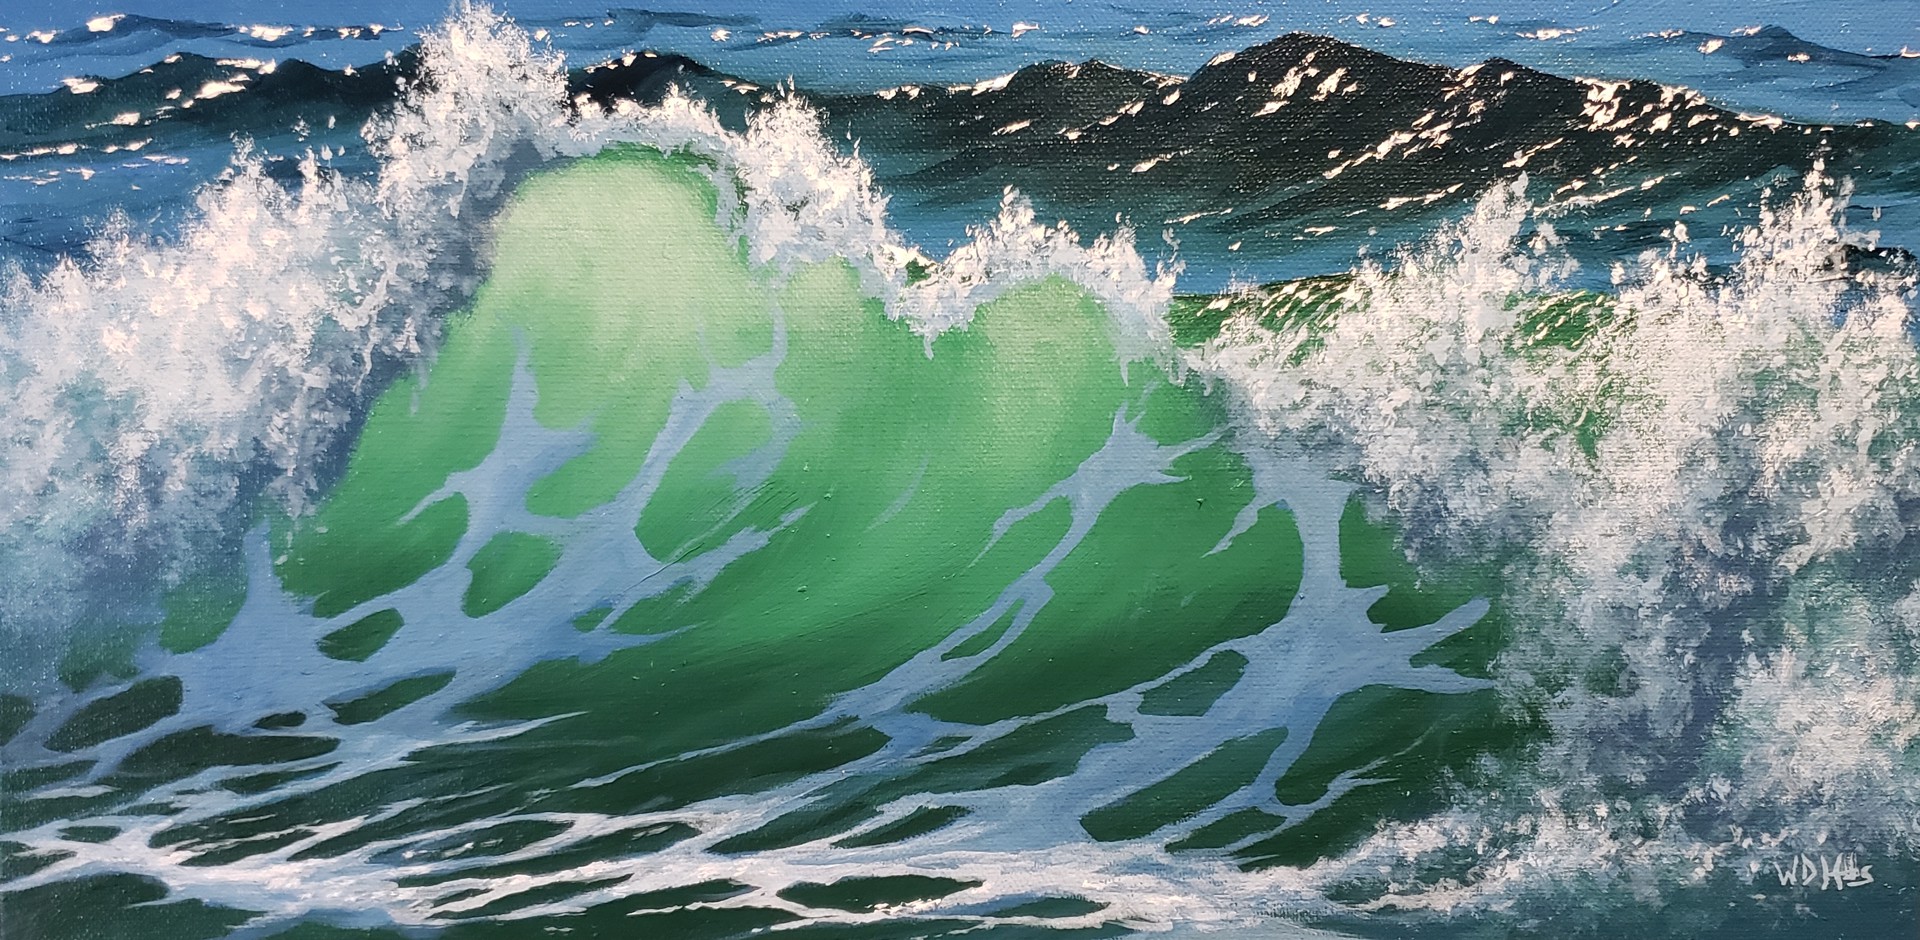 Study of Waves in Early Light by William D. Hobbs